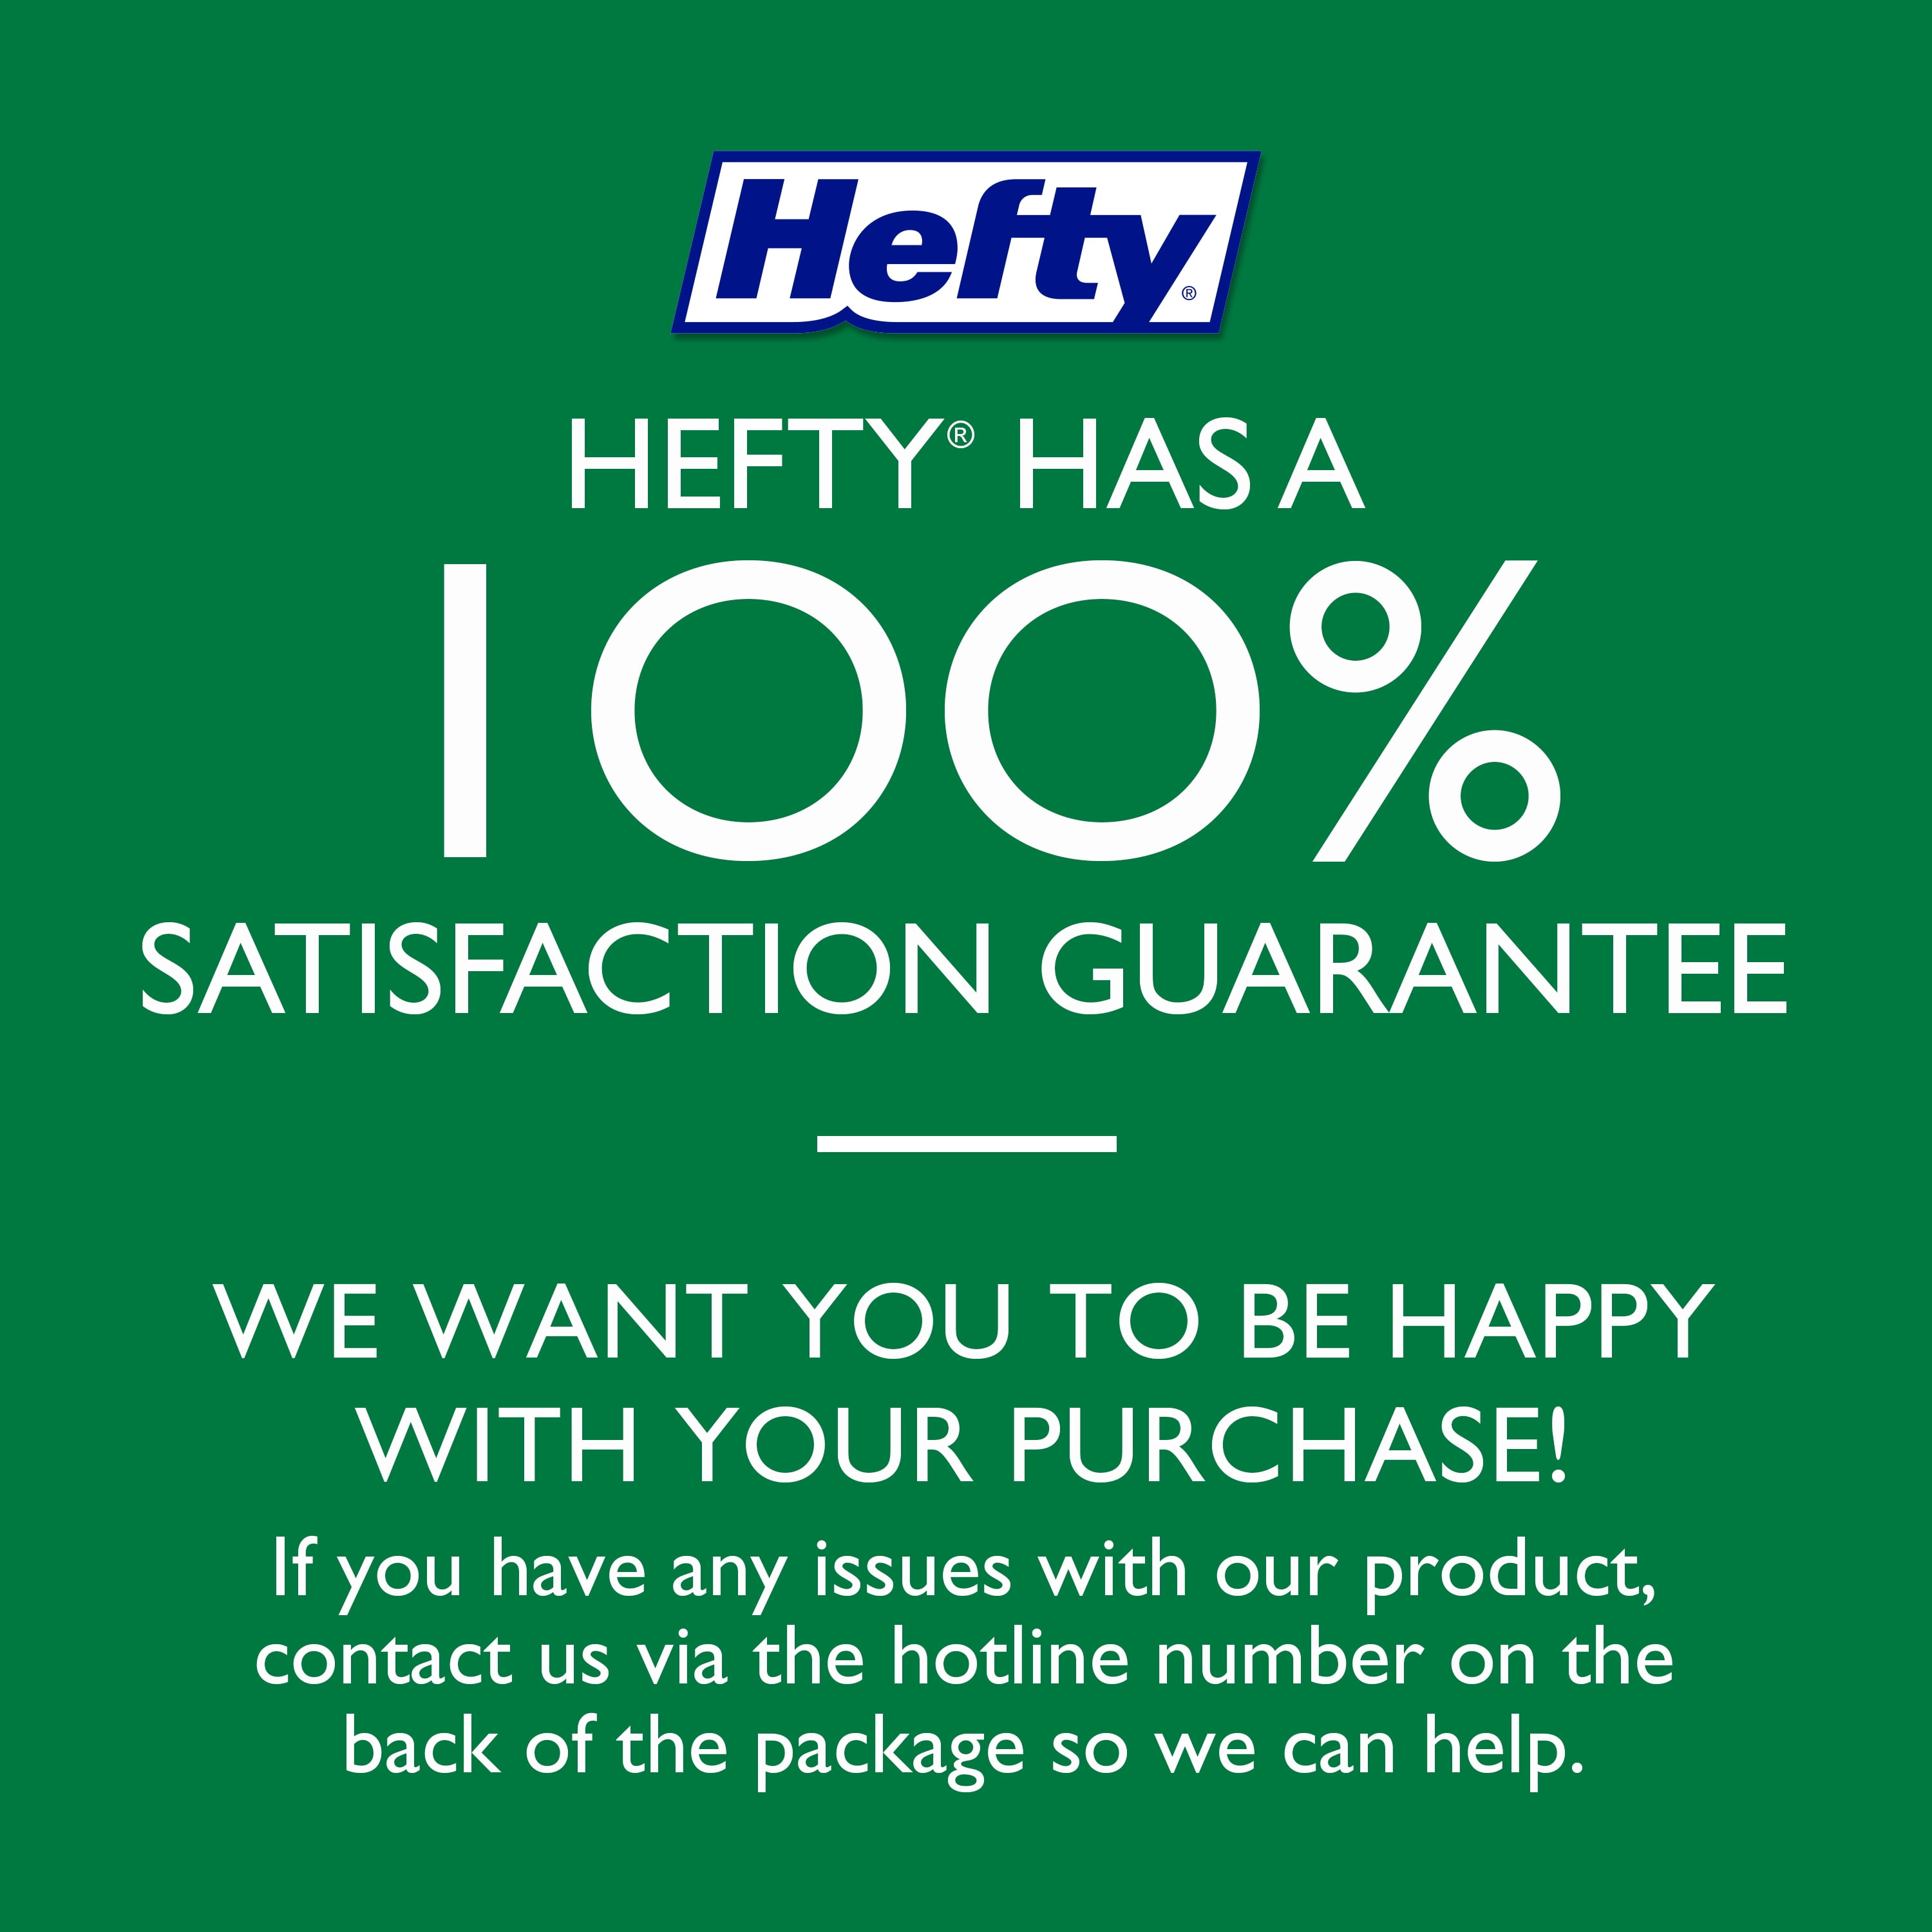 Hefty EcoSave 100% Compostable 8.75 in. Plates